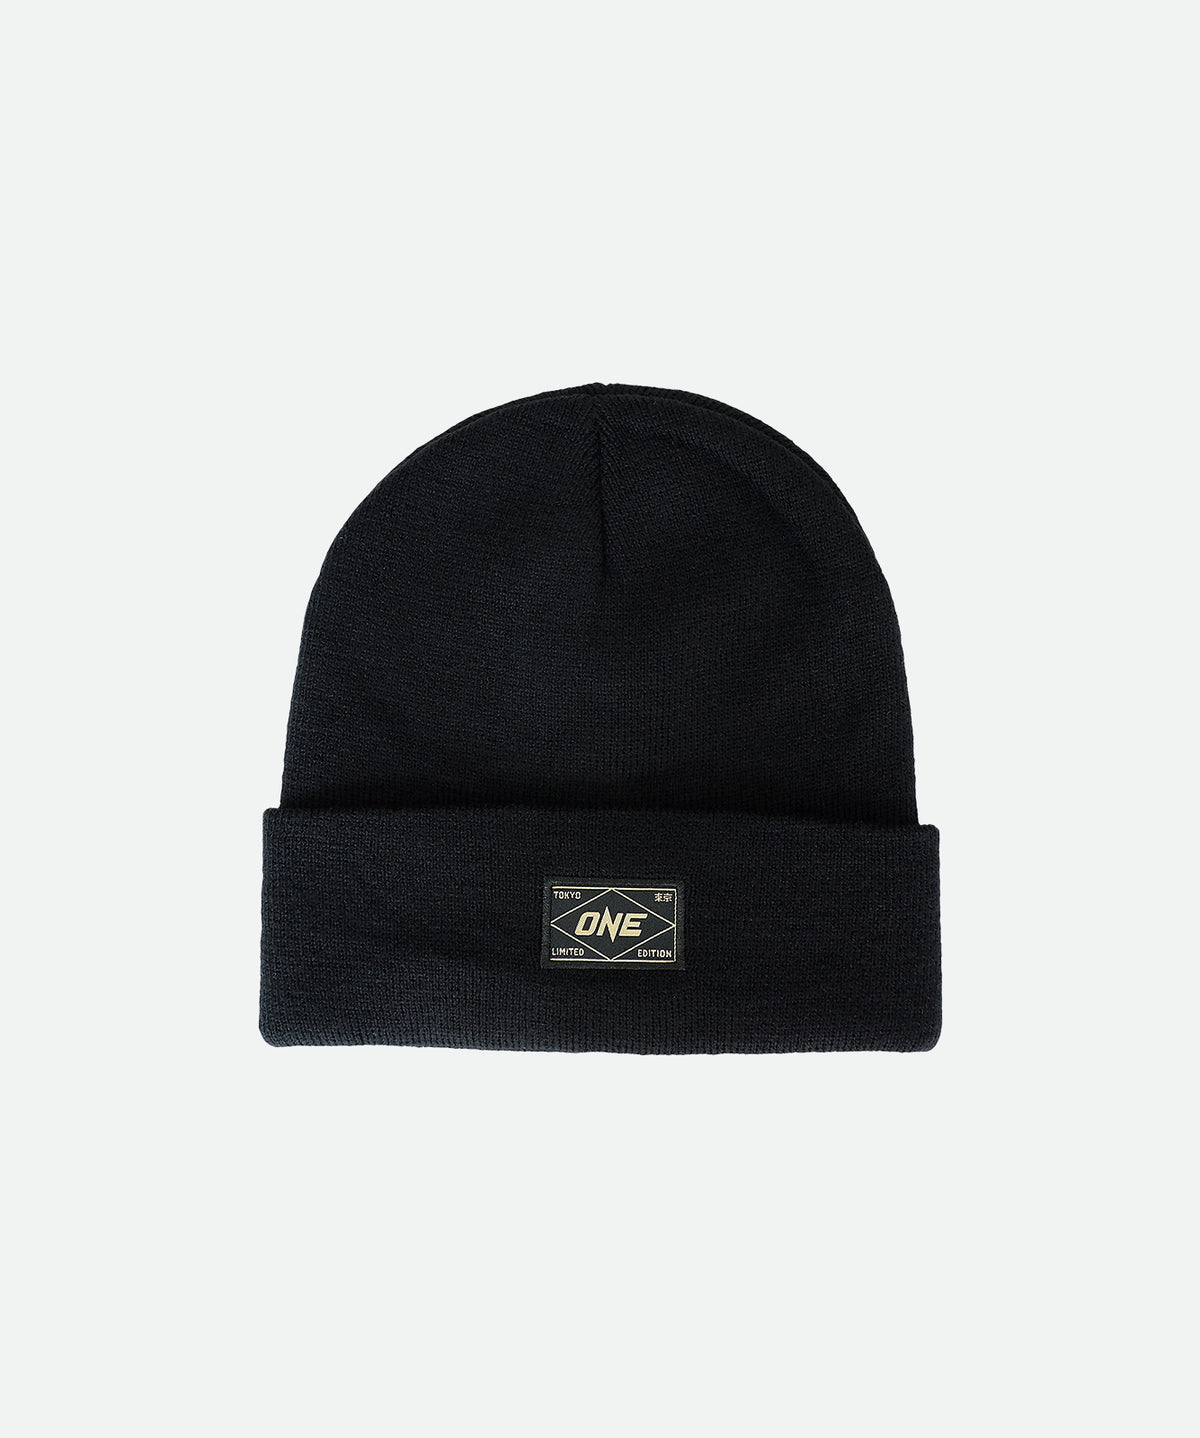 ONE Tokyo Beanie - ONE.SHOP | The Official Online Shop of ONE Championship